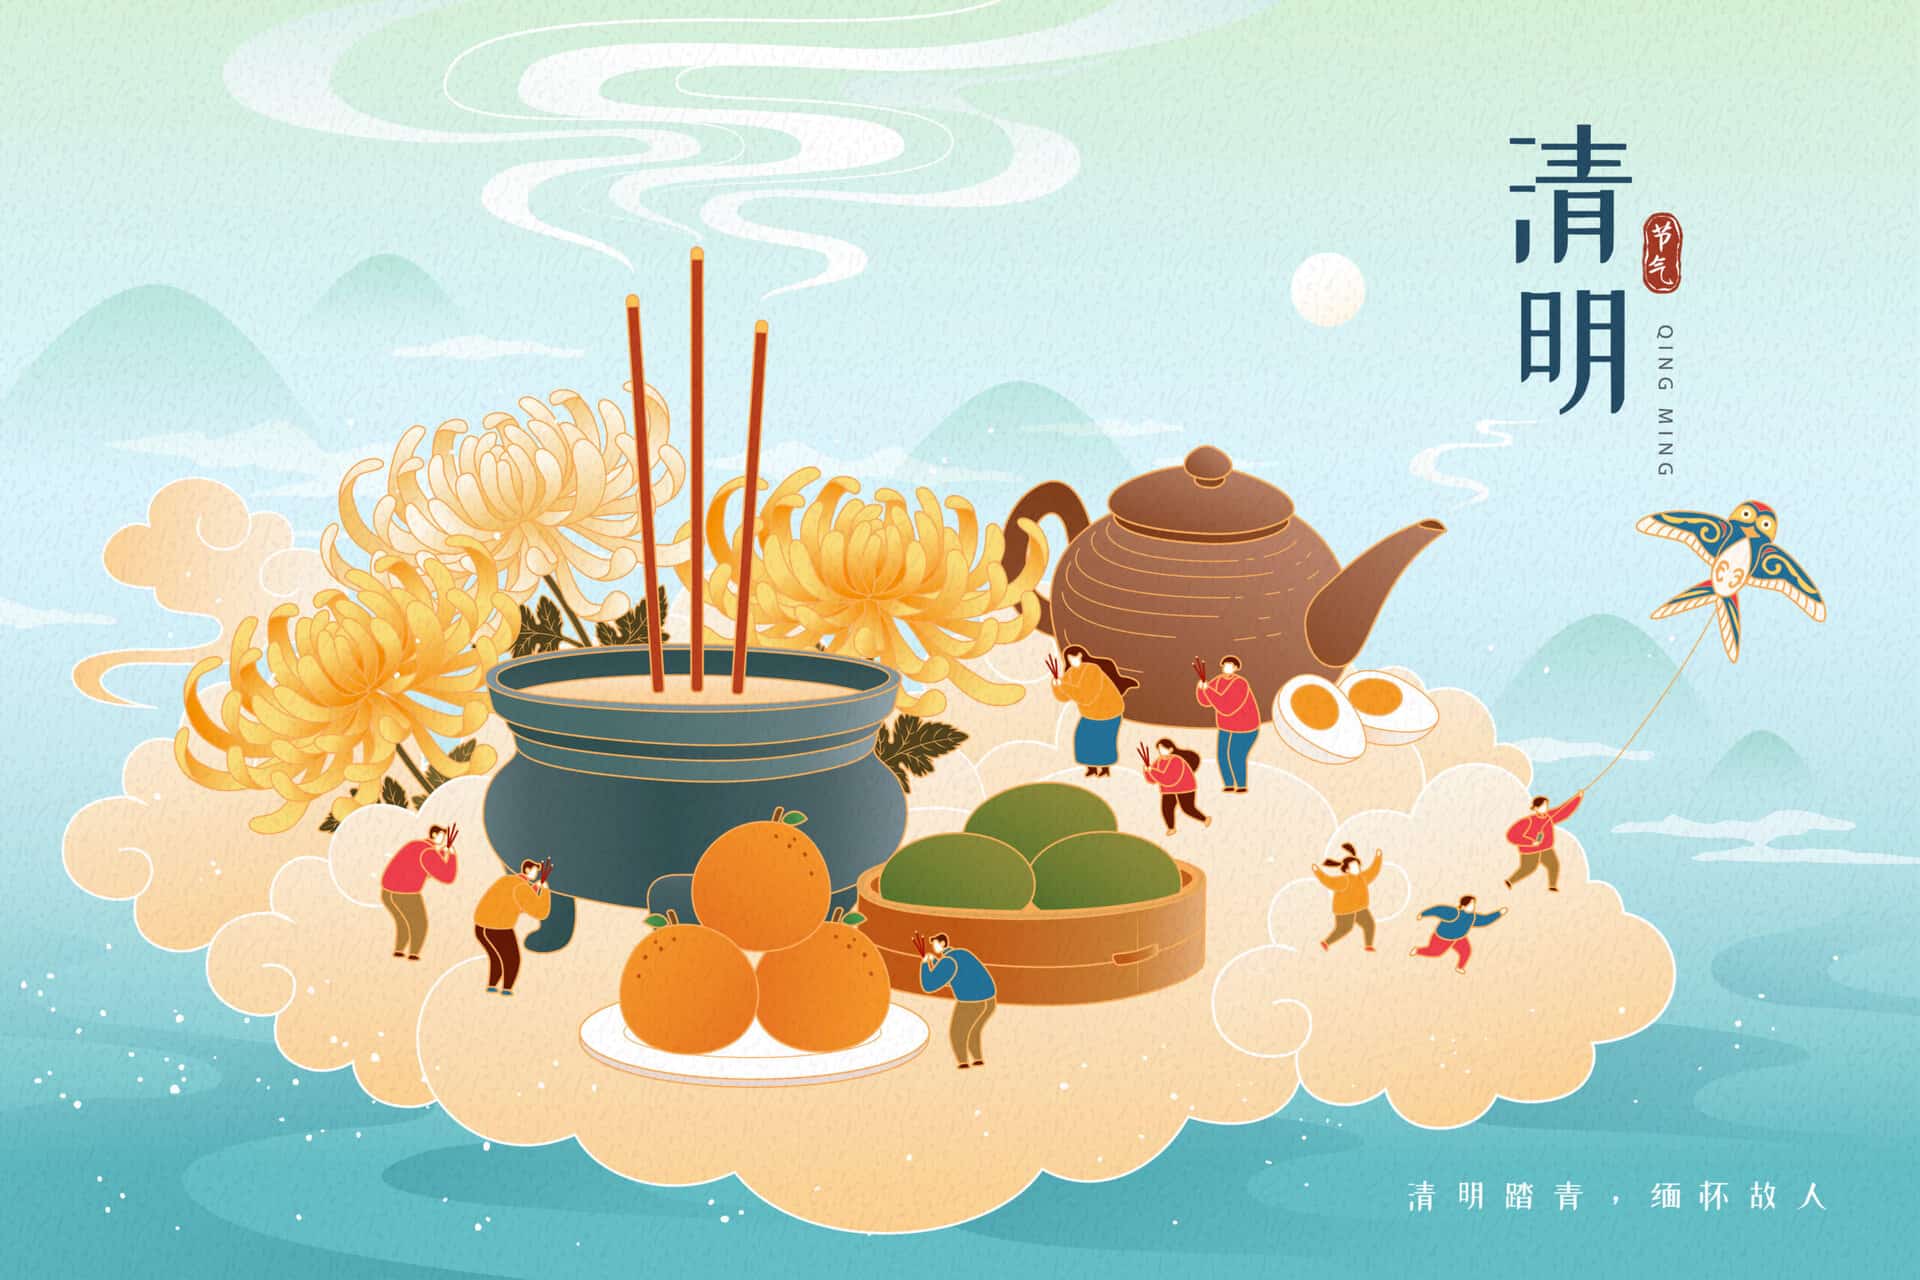 China’s Cultural Traditions: The Qingming Festival